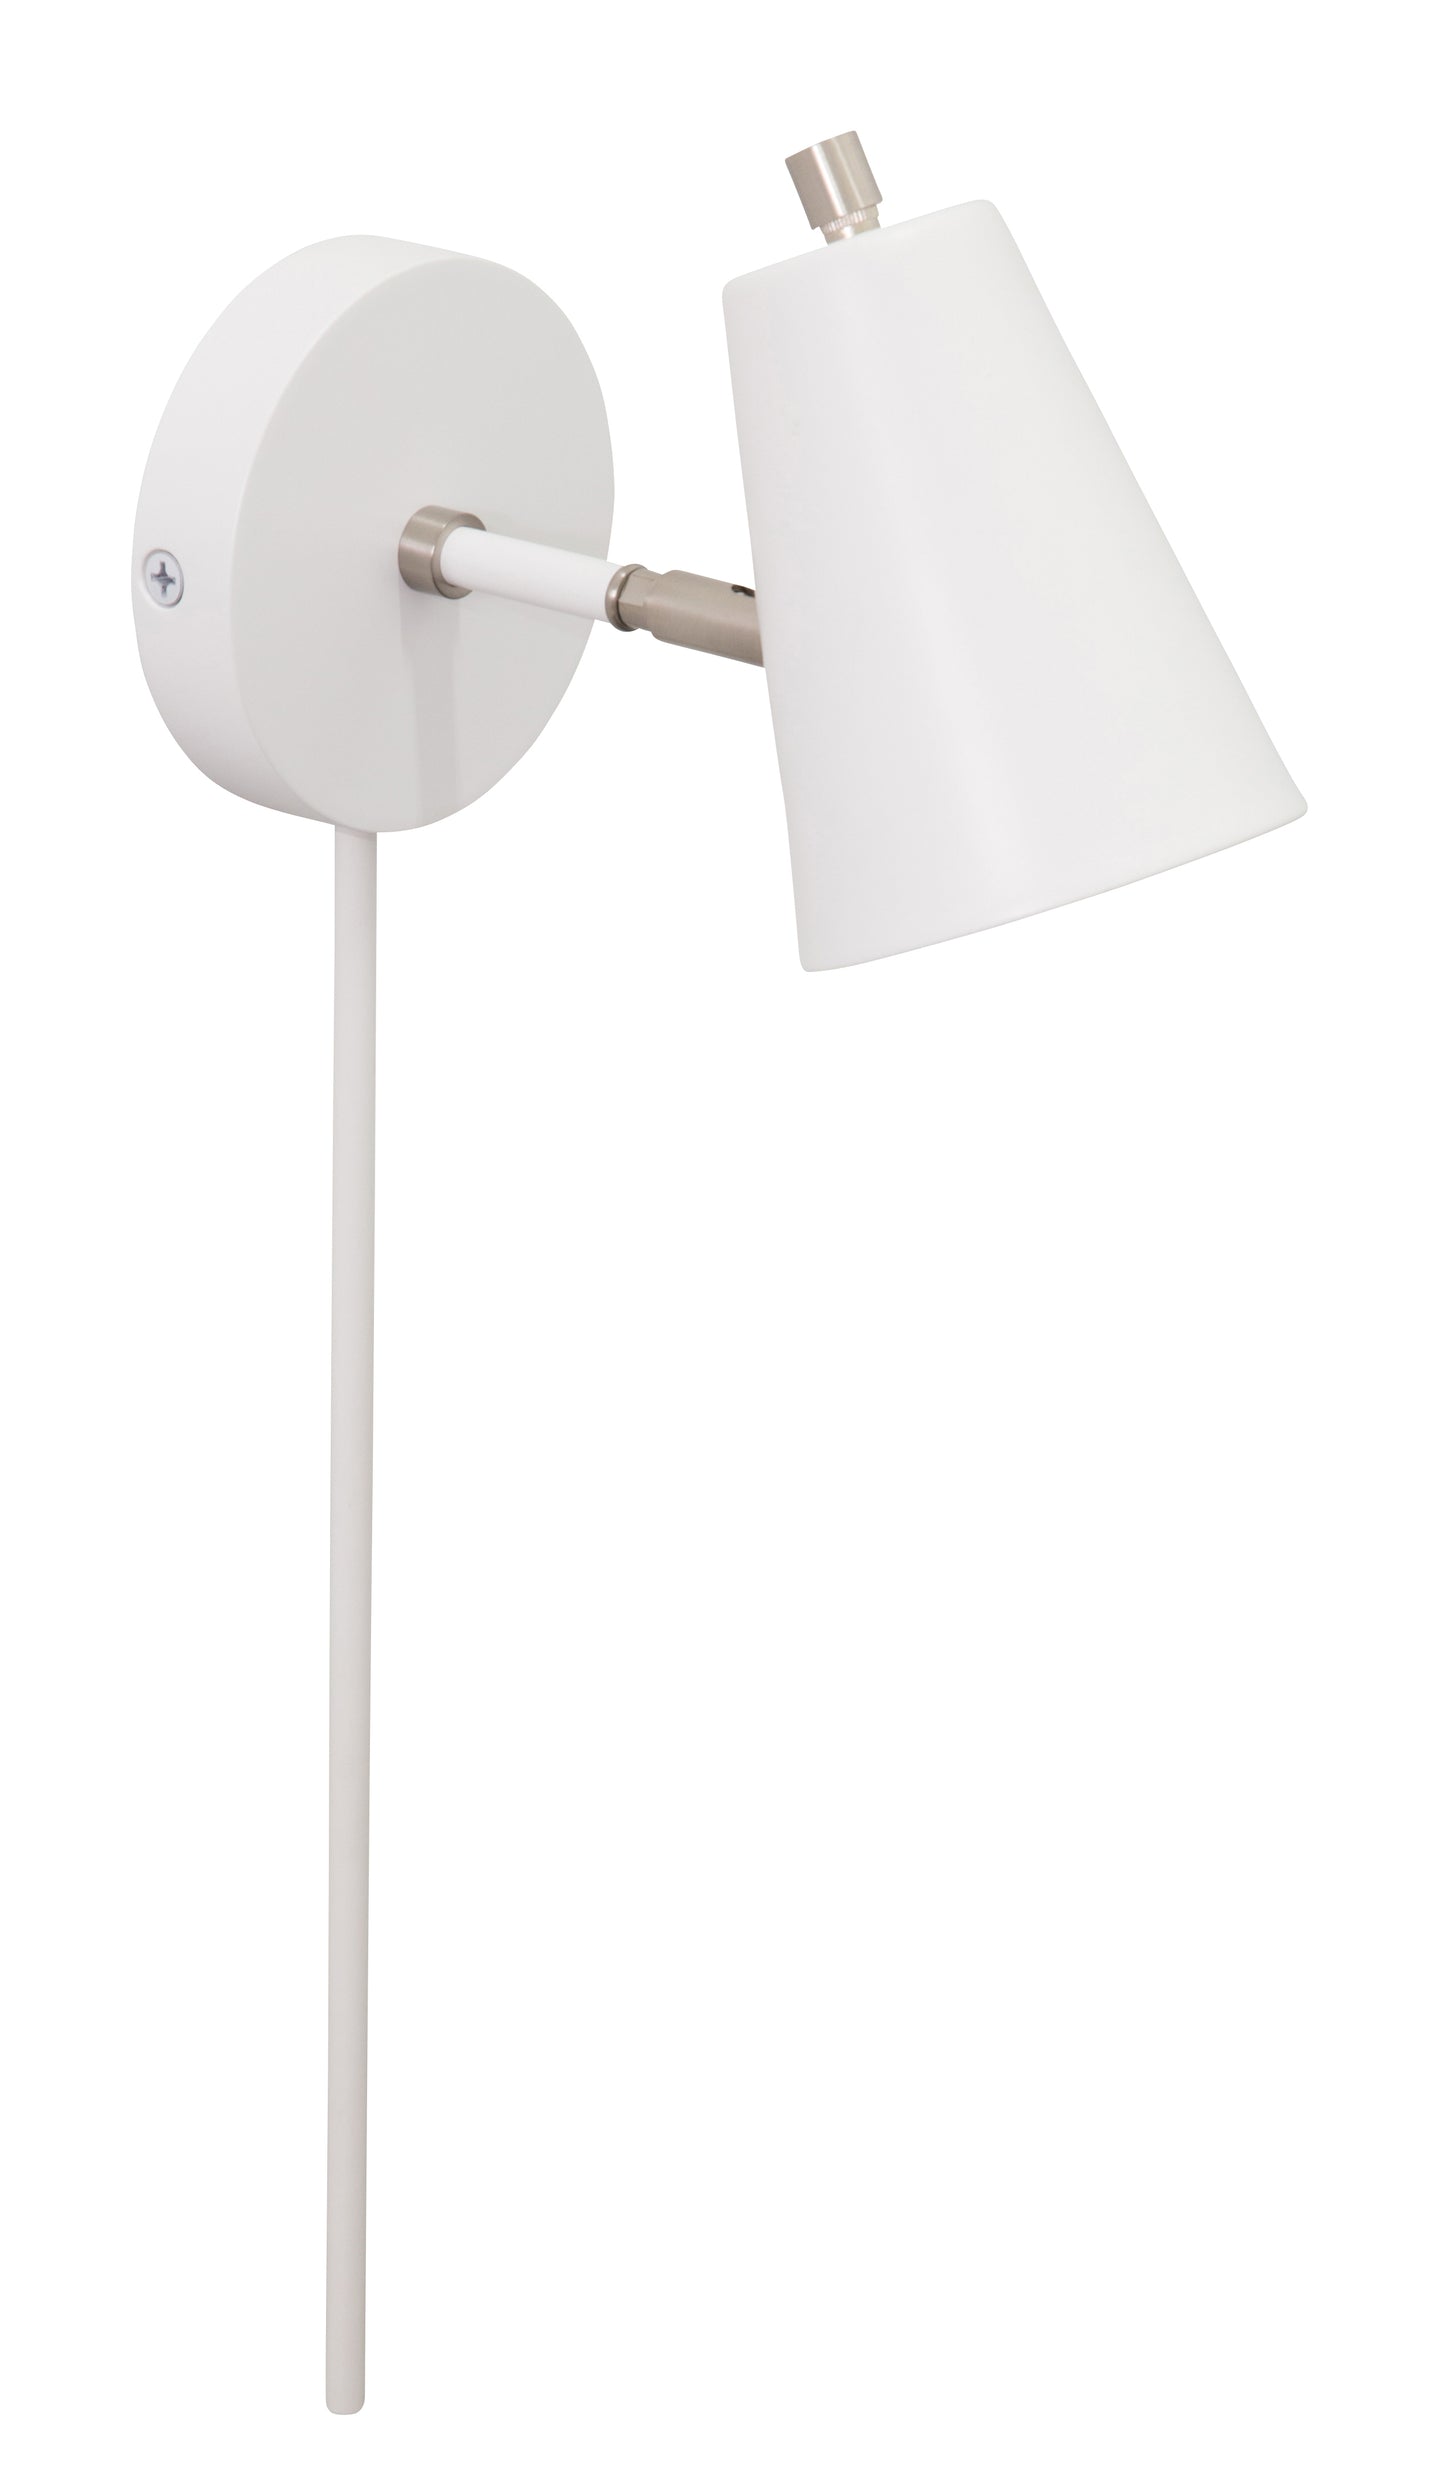 House of Troy Kirby LED wall lamp in white with satin nickel accents K175-WT